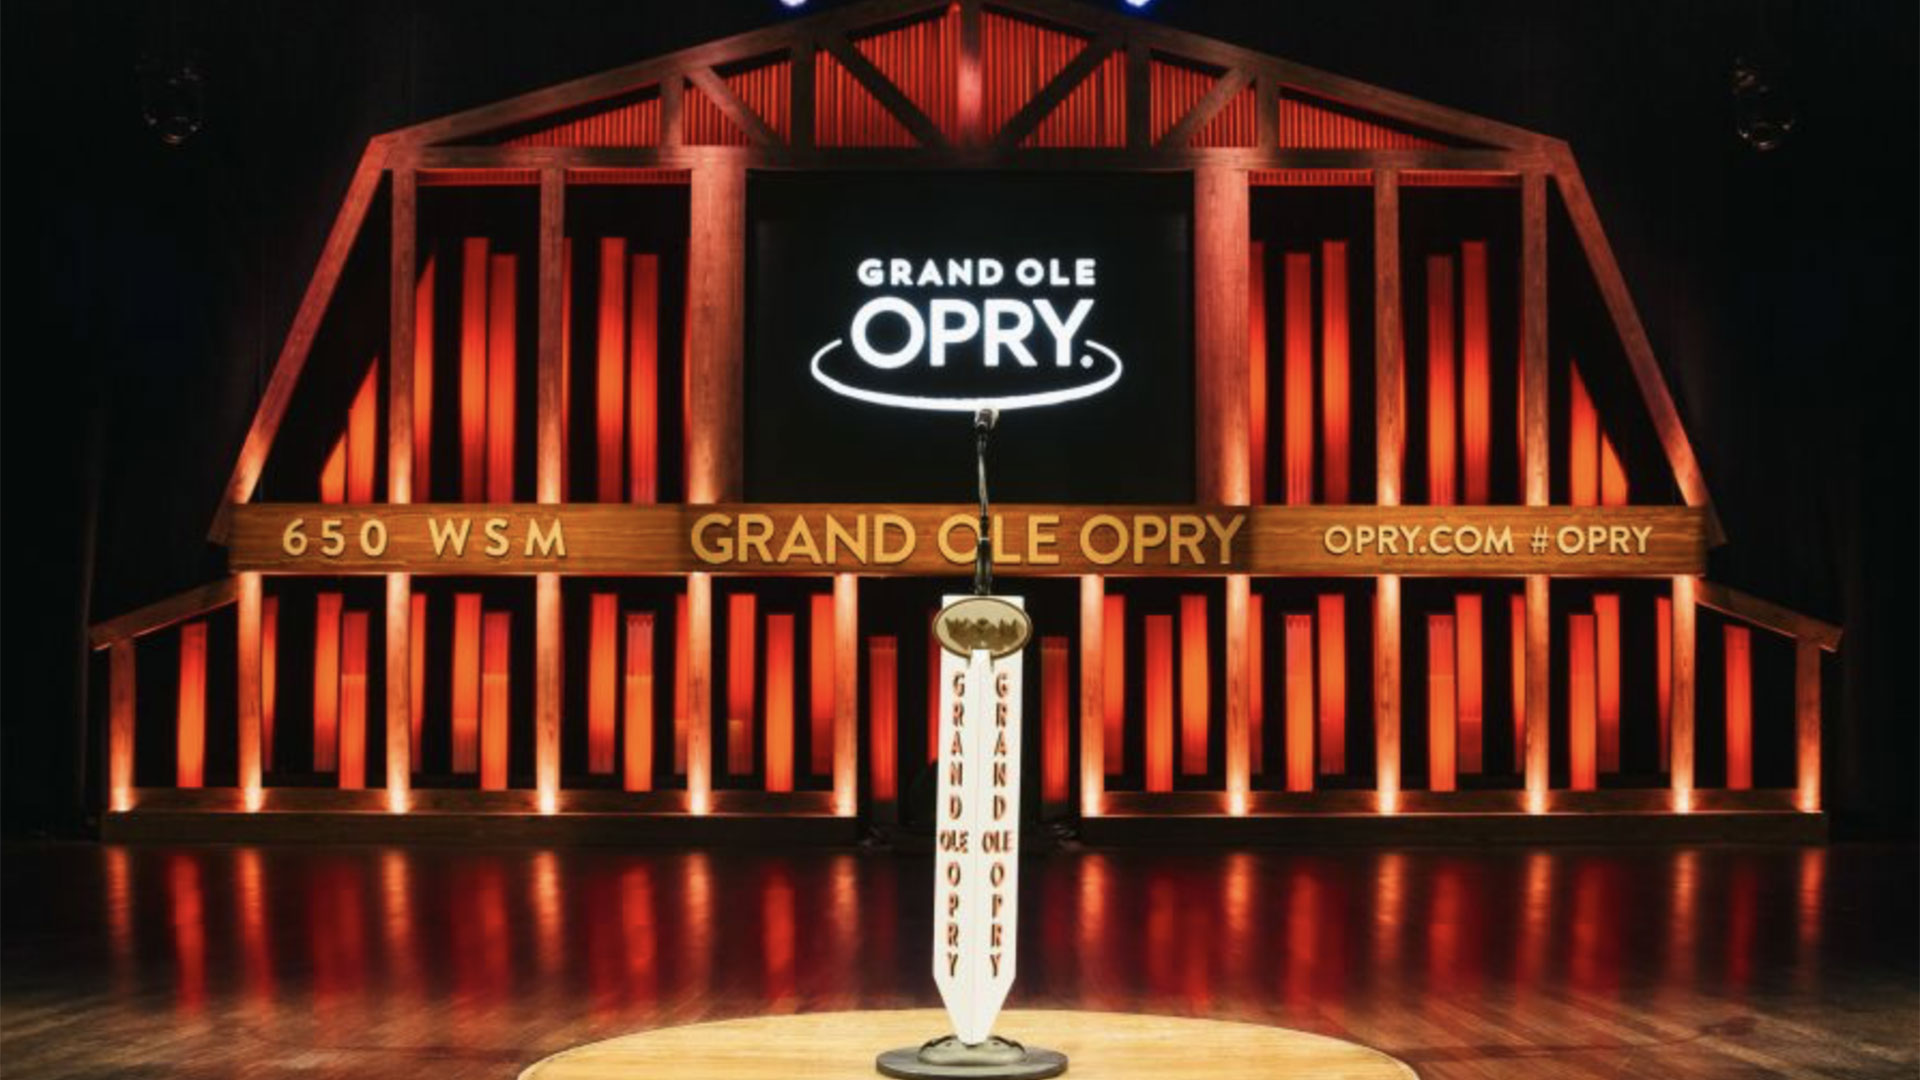 Grand Ole Opry Show Ticket 03